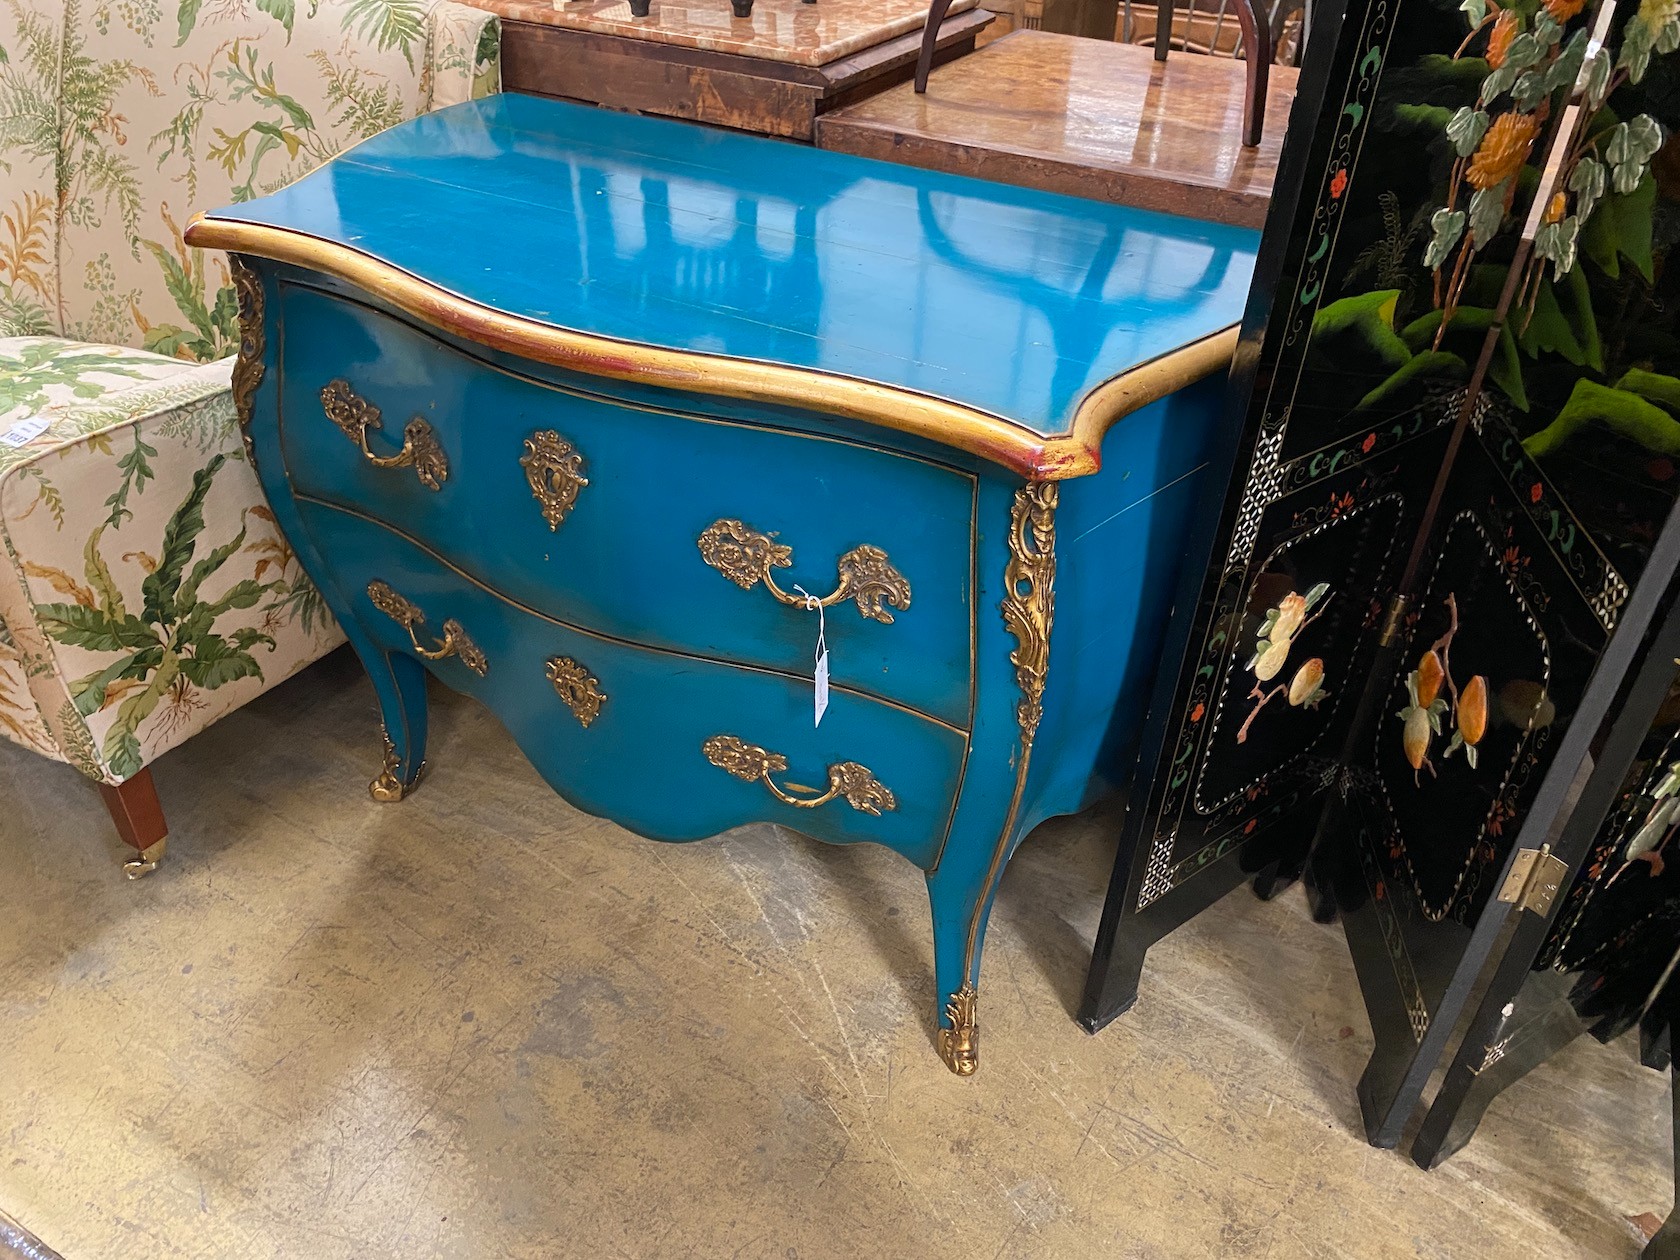 A Louis XV design gilt metal mounted aquamarine lacquered chestnut bombe commode, width 114cm, depth 66cm, height 84cm.